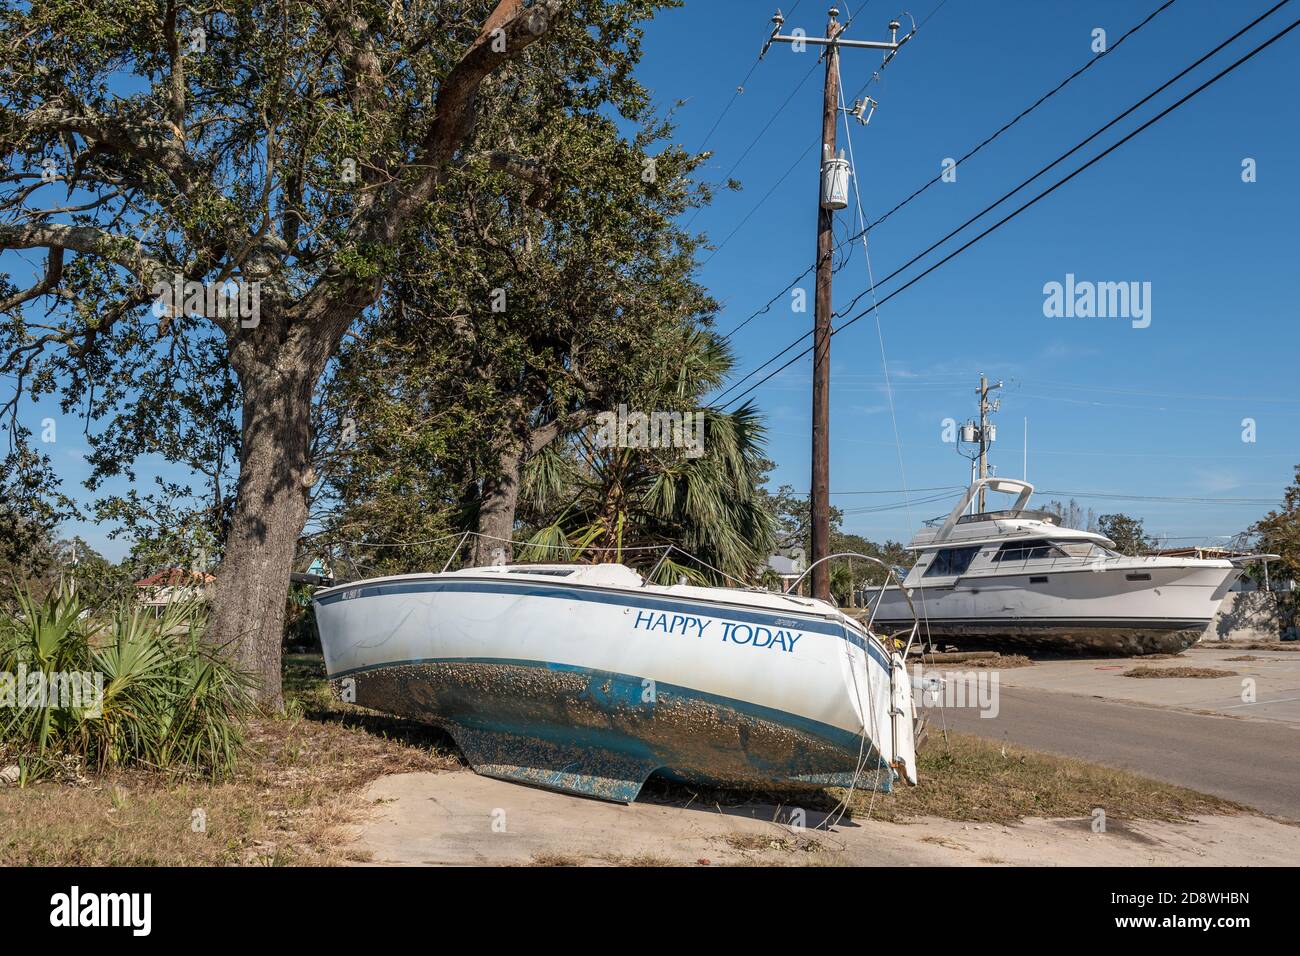 Hurricane Zeta storm surge pushed boats from Long Beach Harbor across Highway 90 on the Mississippi Gulf Coast. Stock Photo